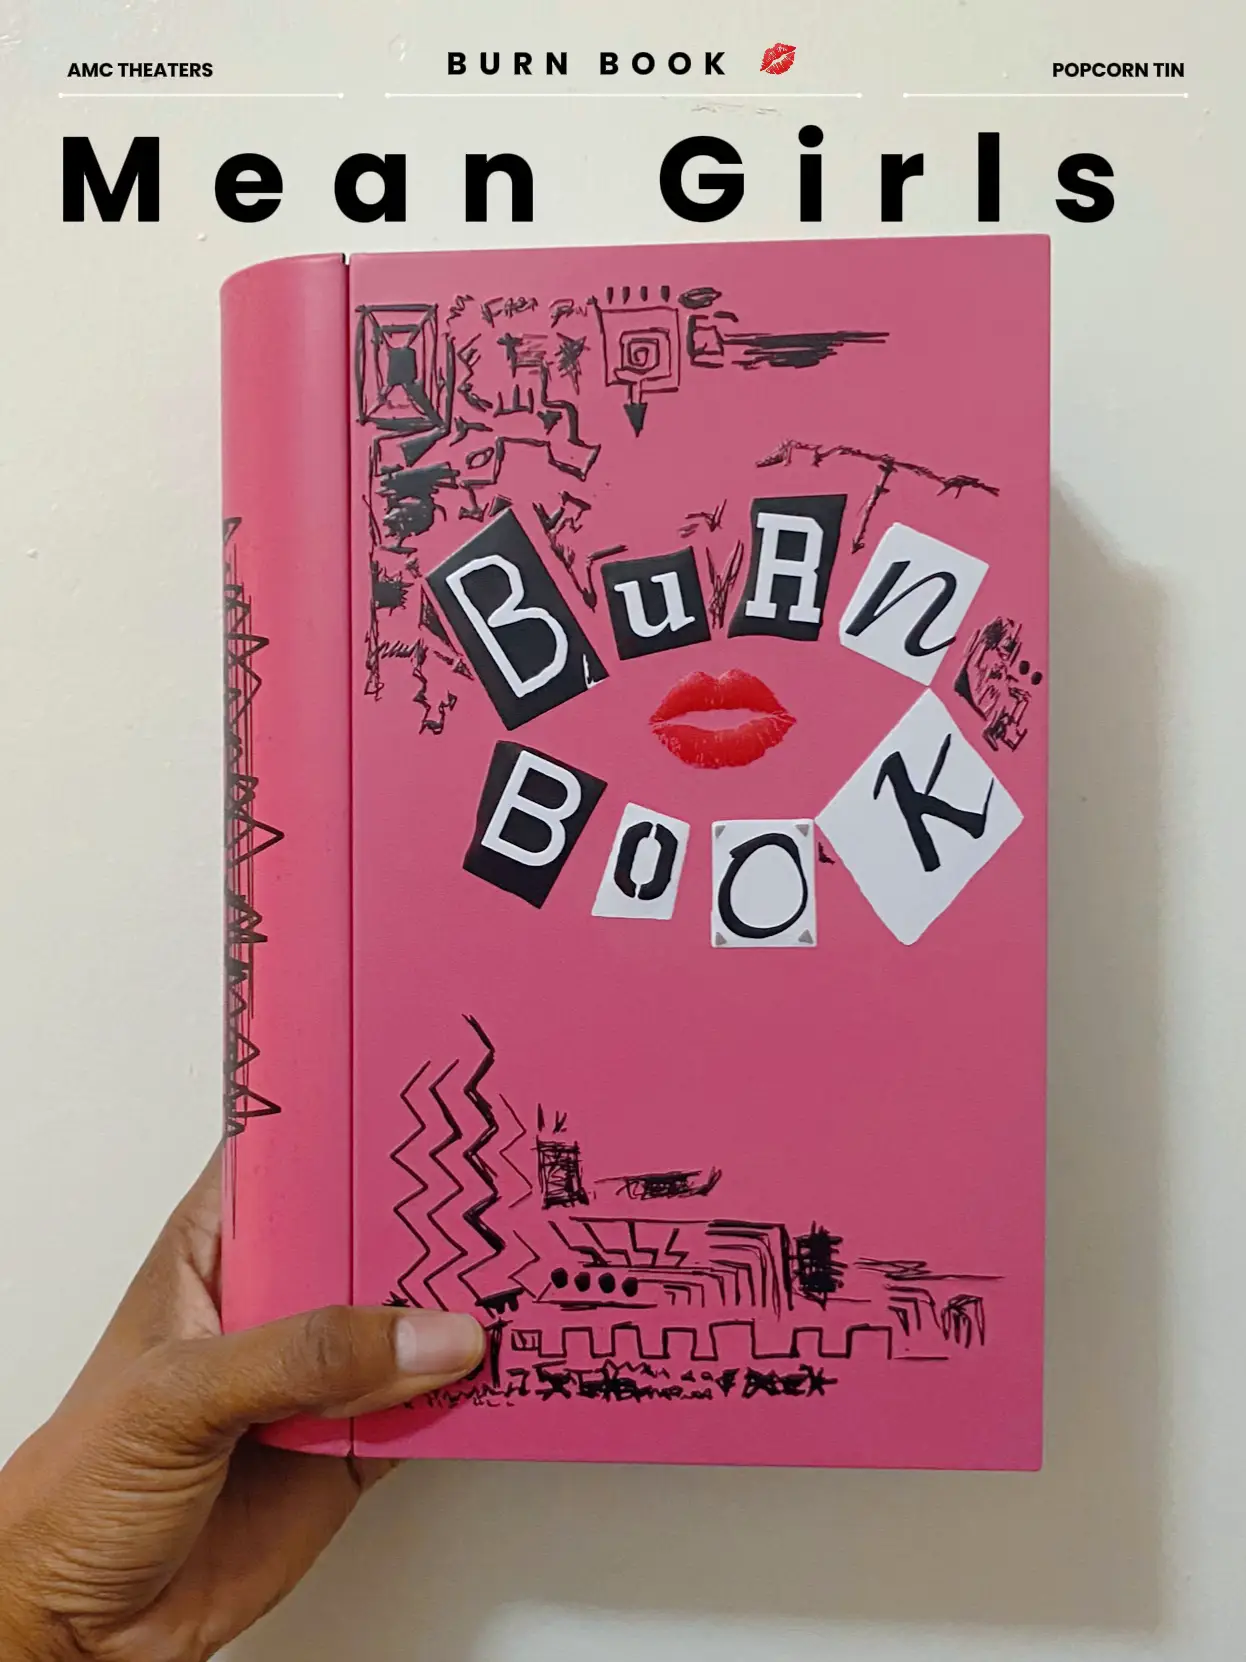  A pink book with the words "Burn Book" on the front.